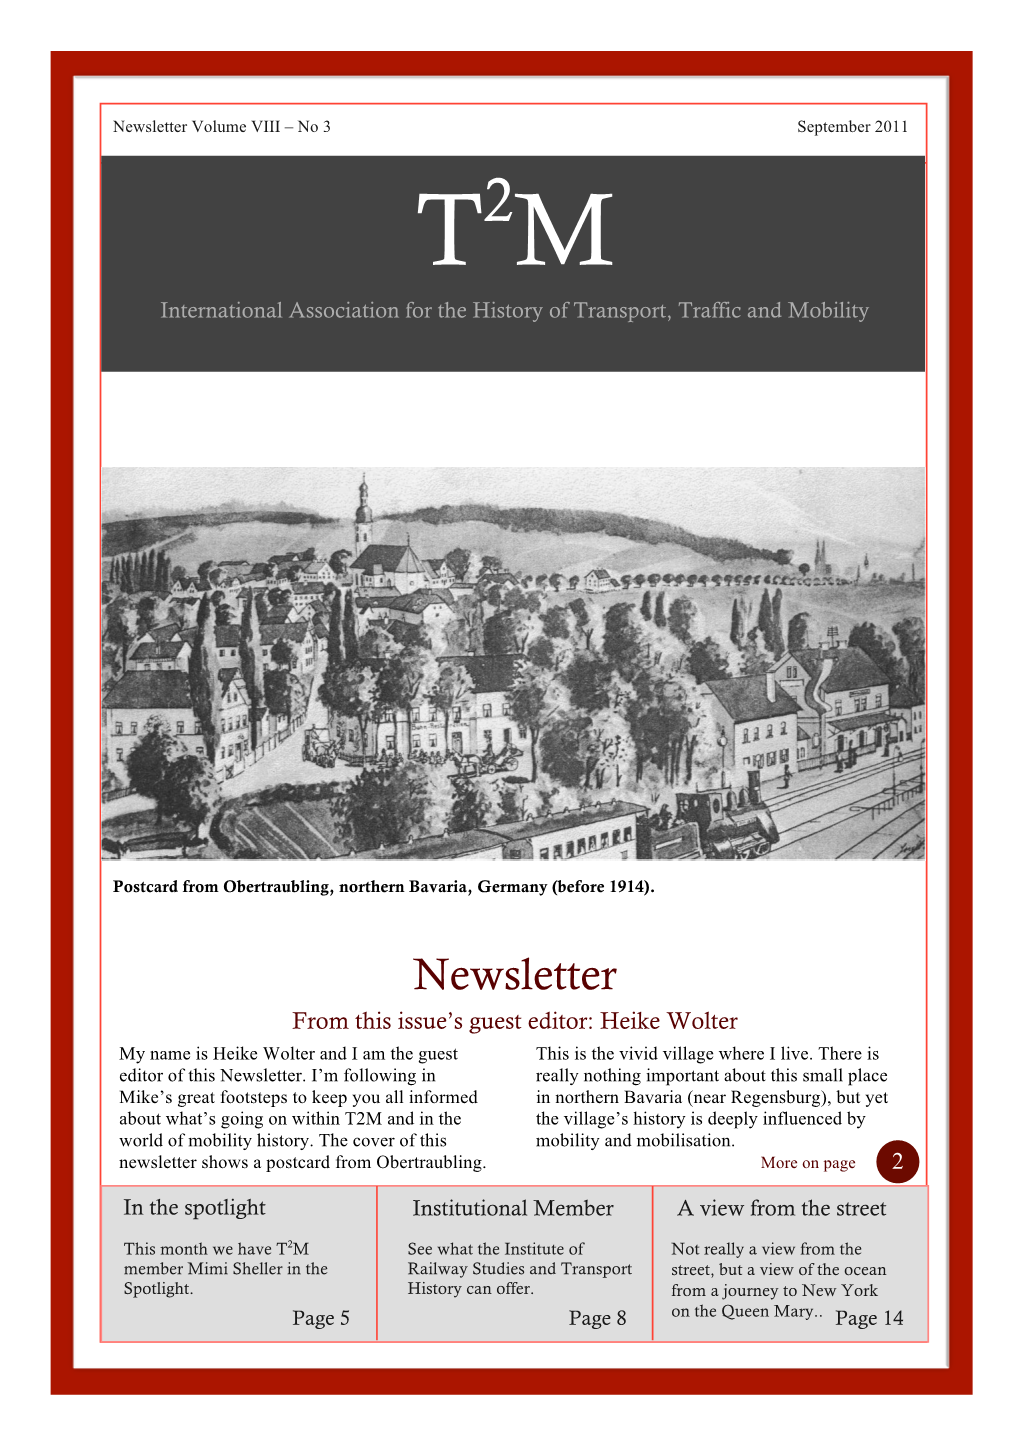 Newsletter Volume VIII – No 3 September 2011 T2M International Association for the History of Transport, Traffic and Mobility